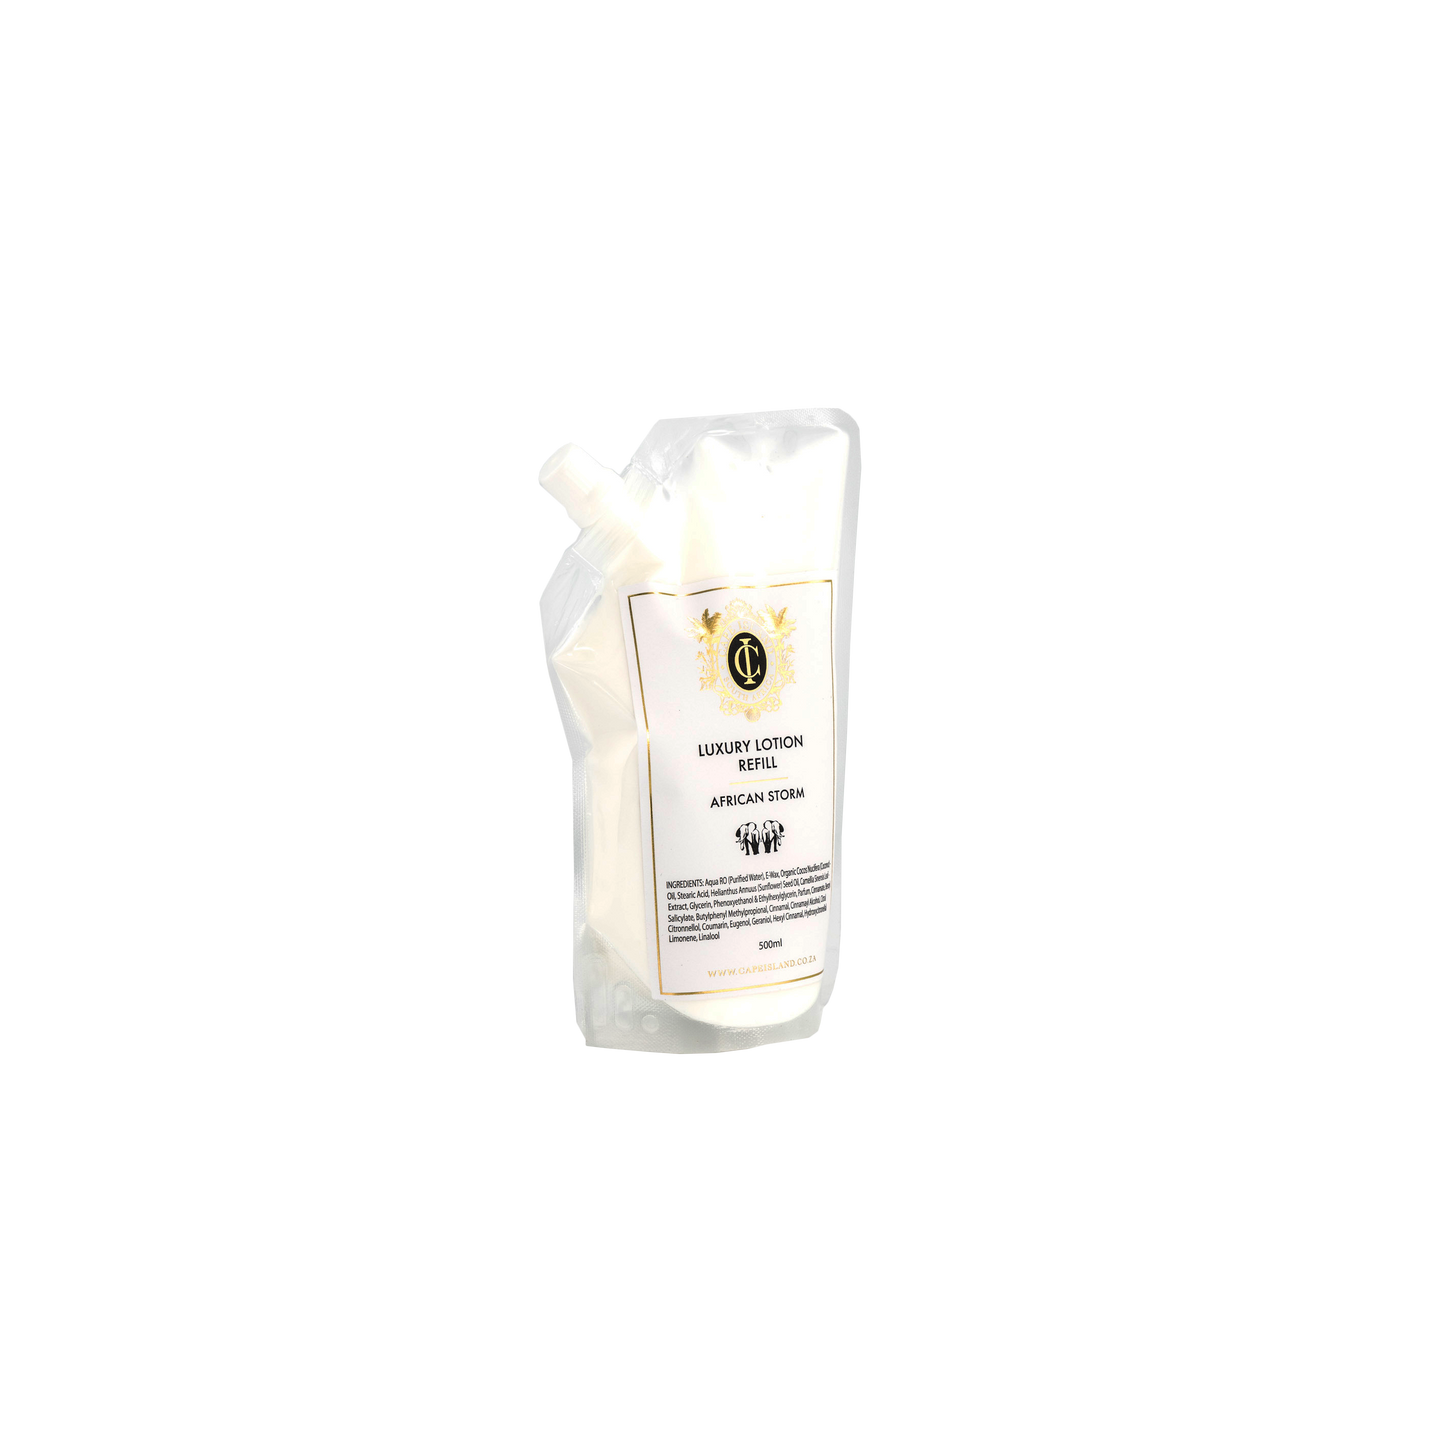 African Storm Fragranced Luxury Lotion